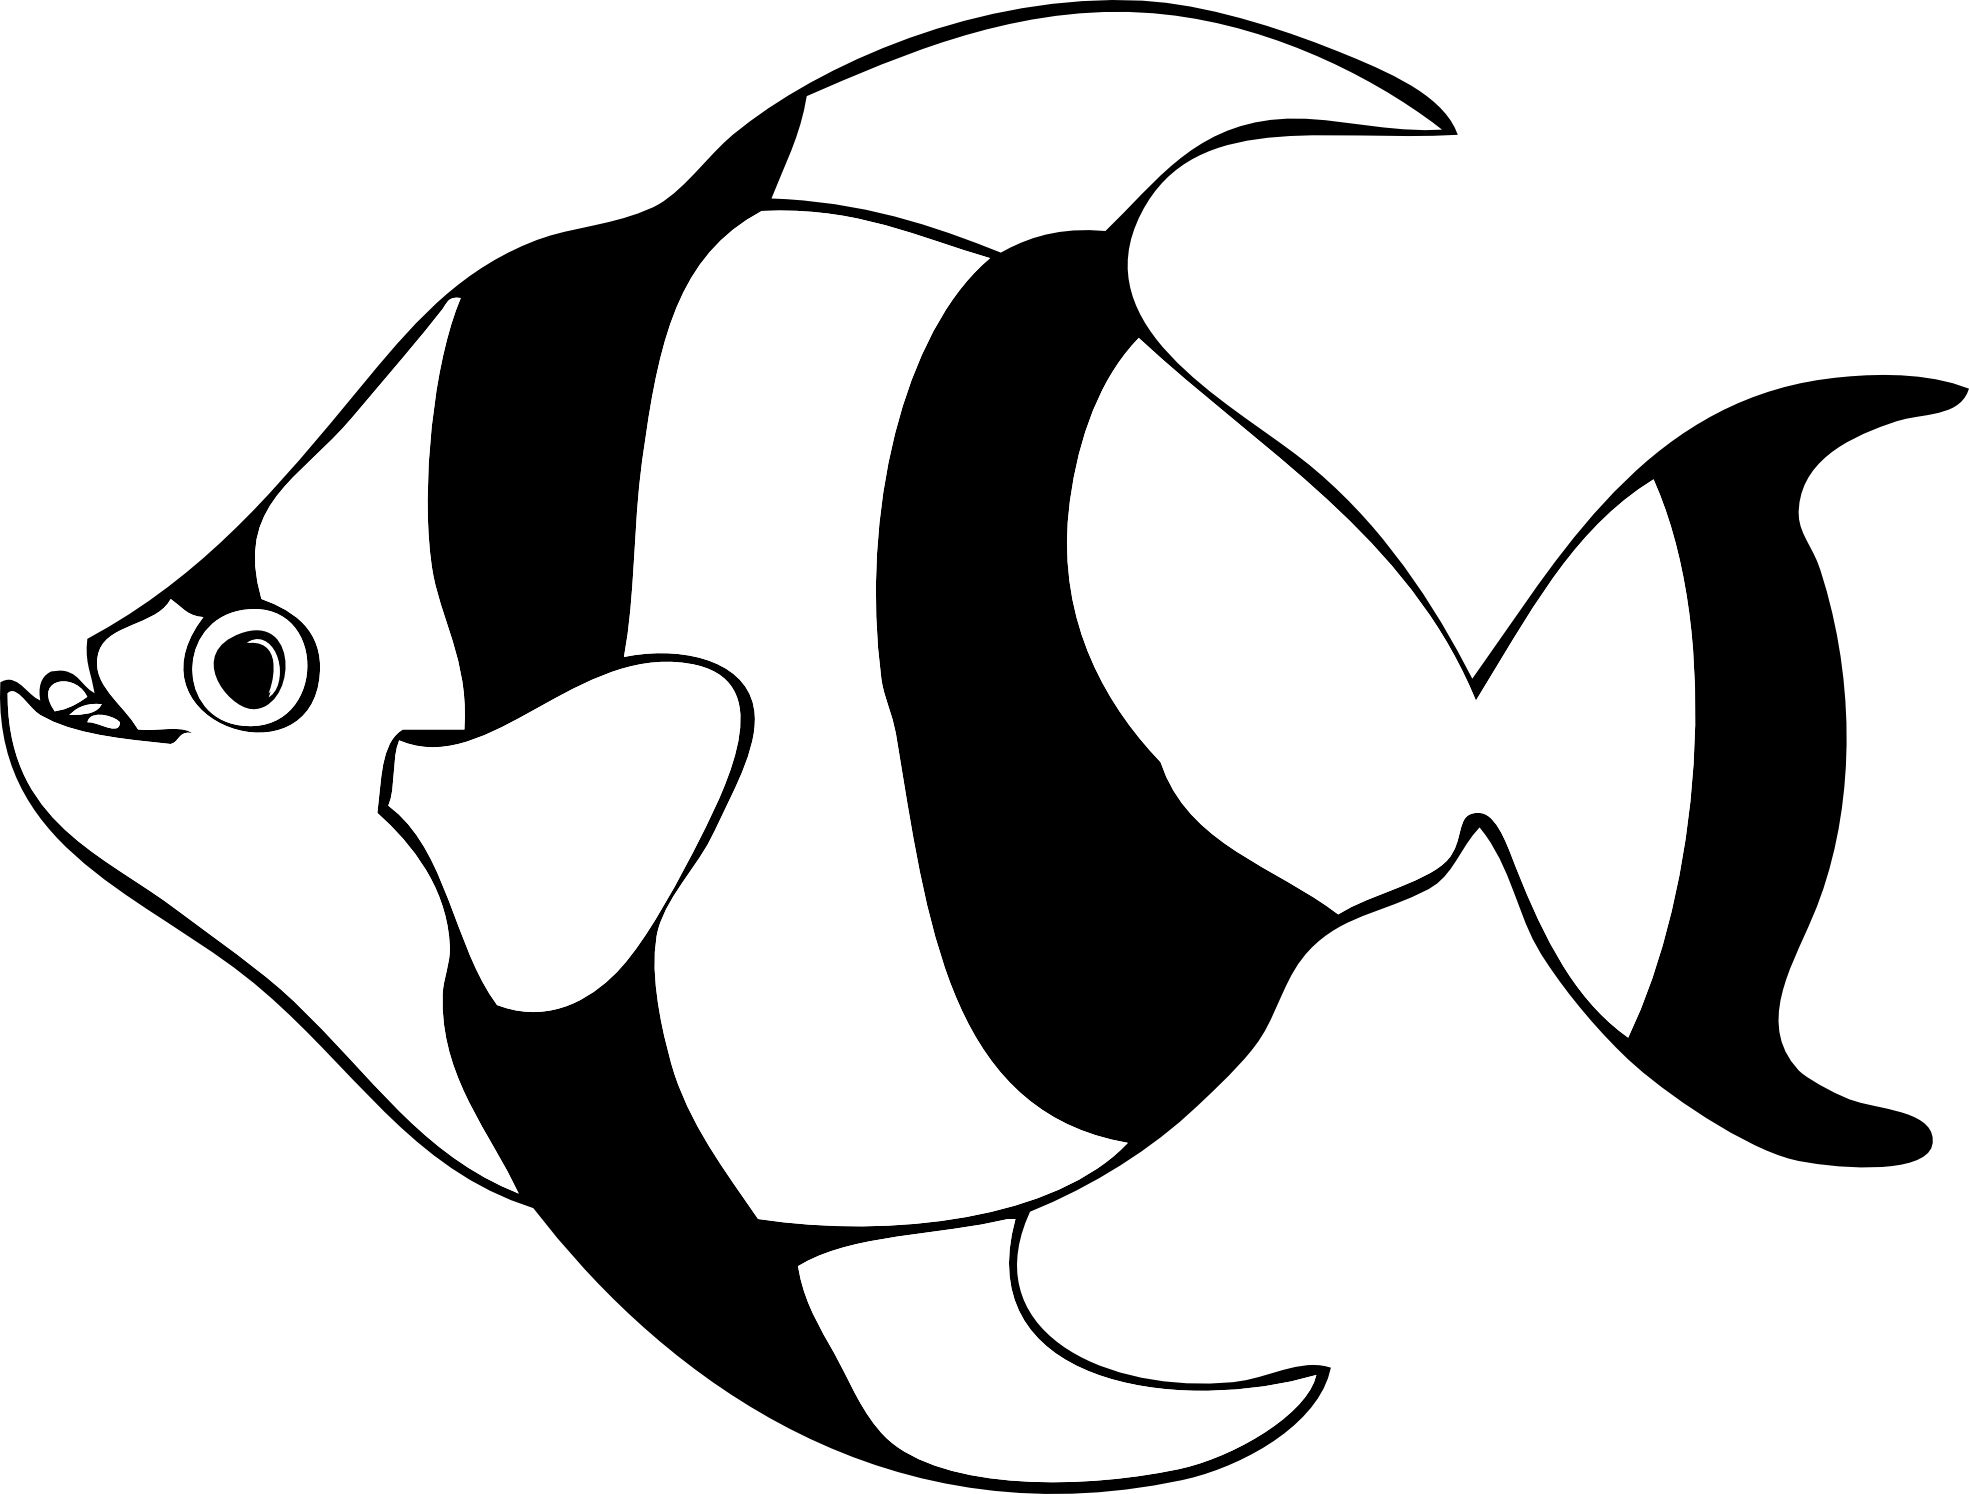 4 clipart black and white fish. Free cliparts that you can download to you computer and use in your designs.